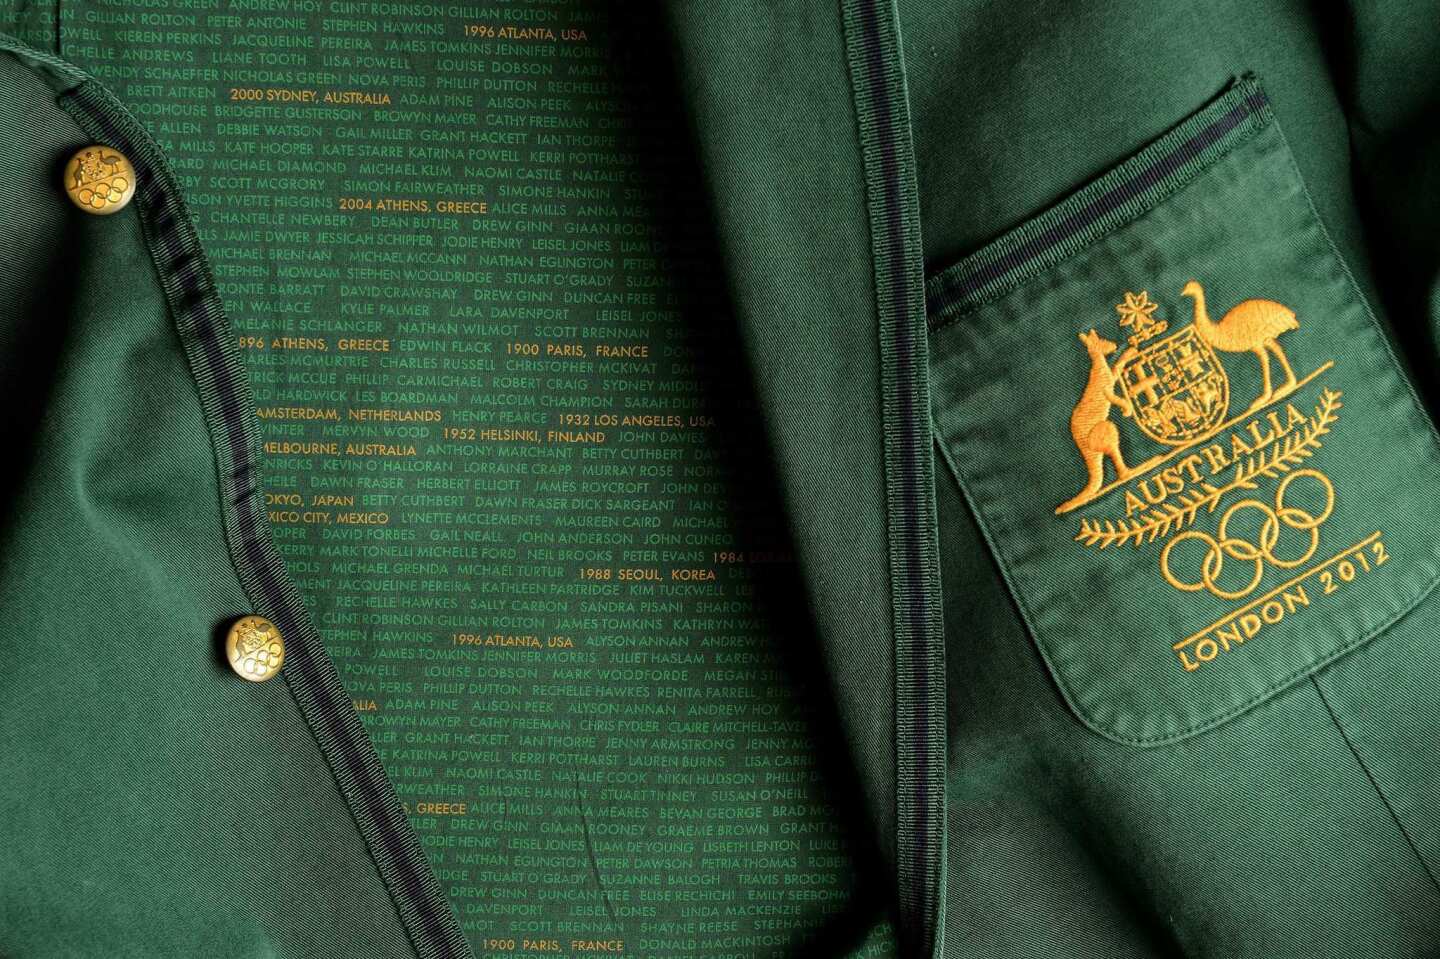 Names of former Australian Olympic Games medalists are shown in the jacket lining of the Australian Olympic uniform blazer. The blazer is being worn by Australian athletes at the London Games.